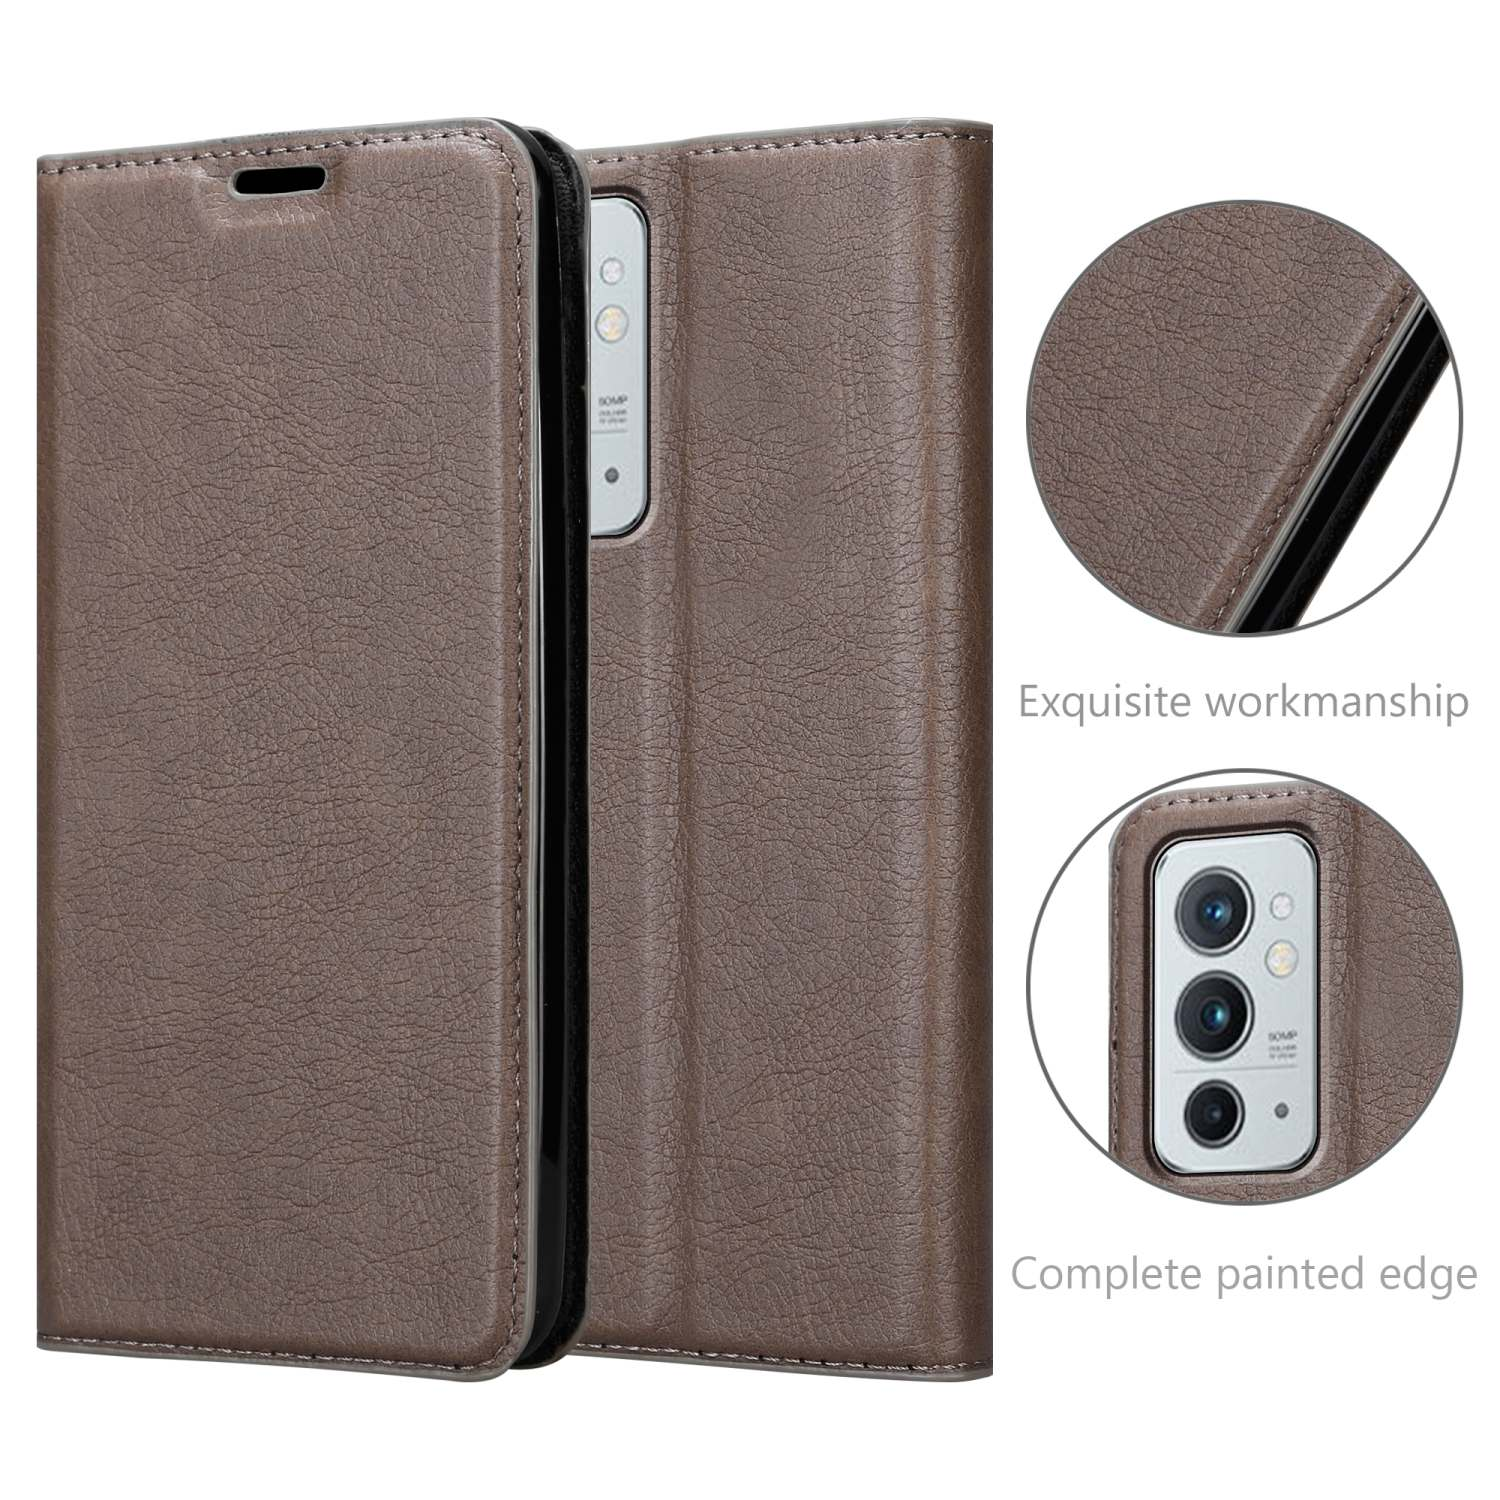 CADORABO Book BRAUN 9RT Invisible KAFFEE Hülle Magnet, 5G, OnePlus, Bookcover